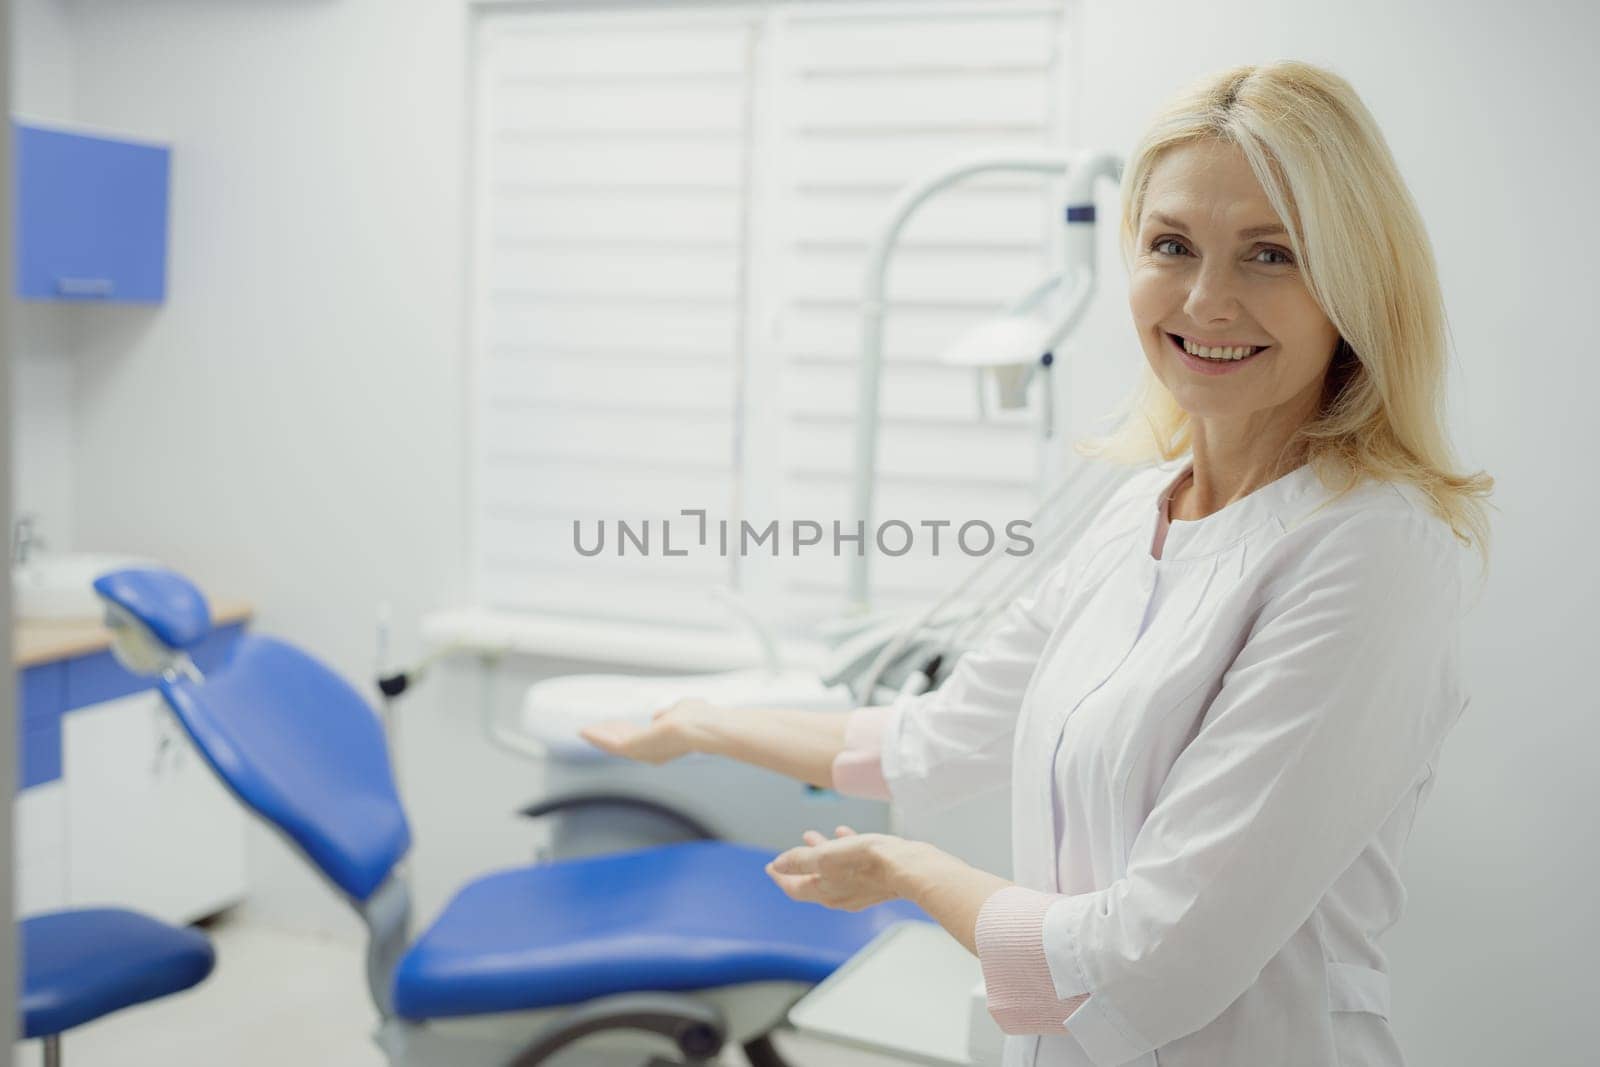 Woman working in dental clinic and doctor in background.